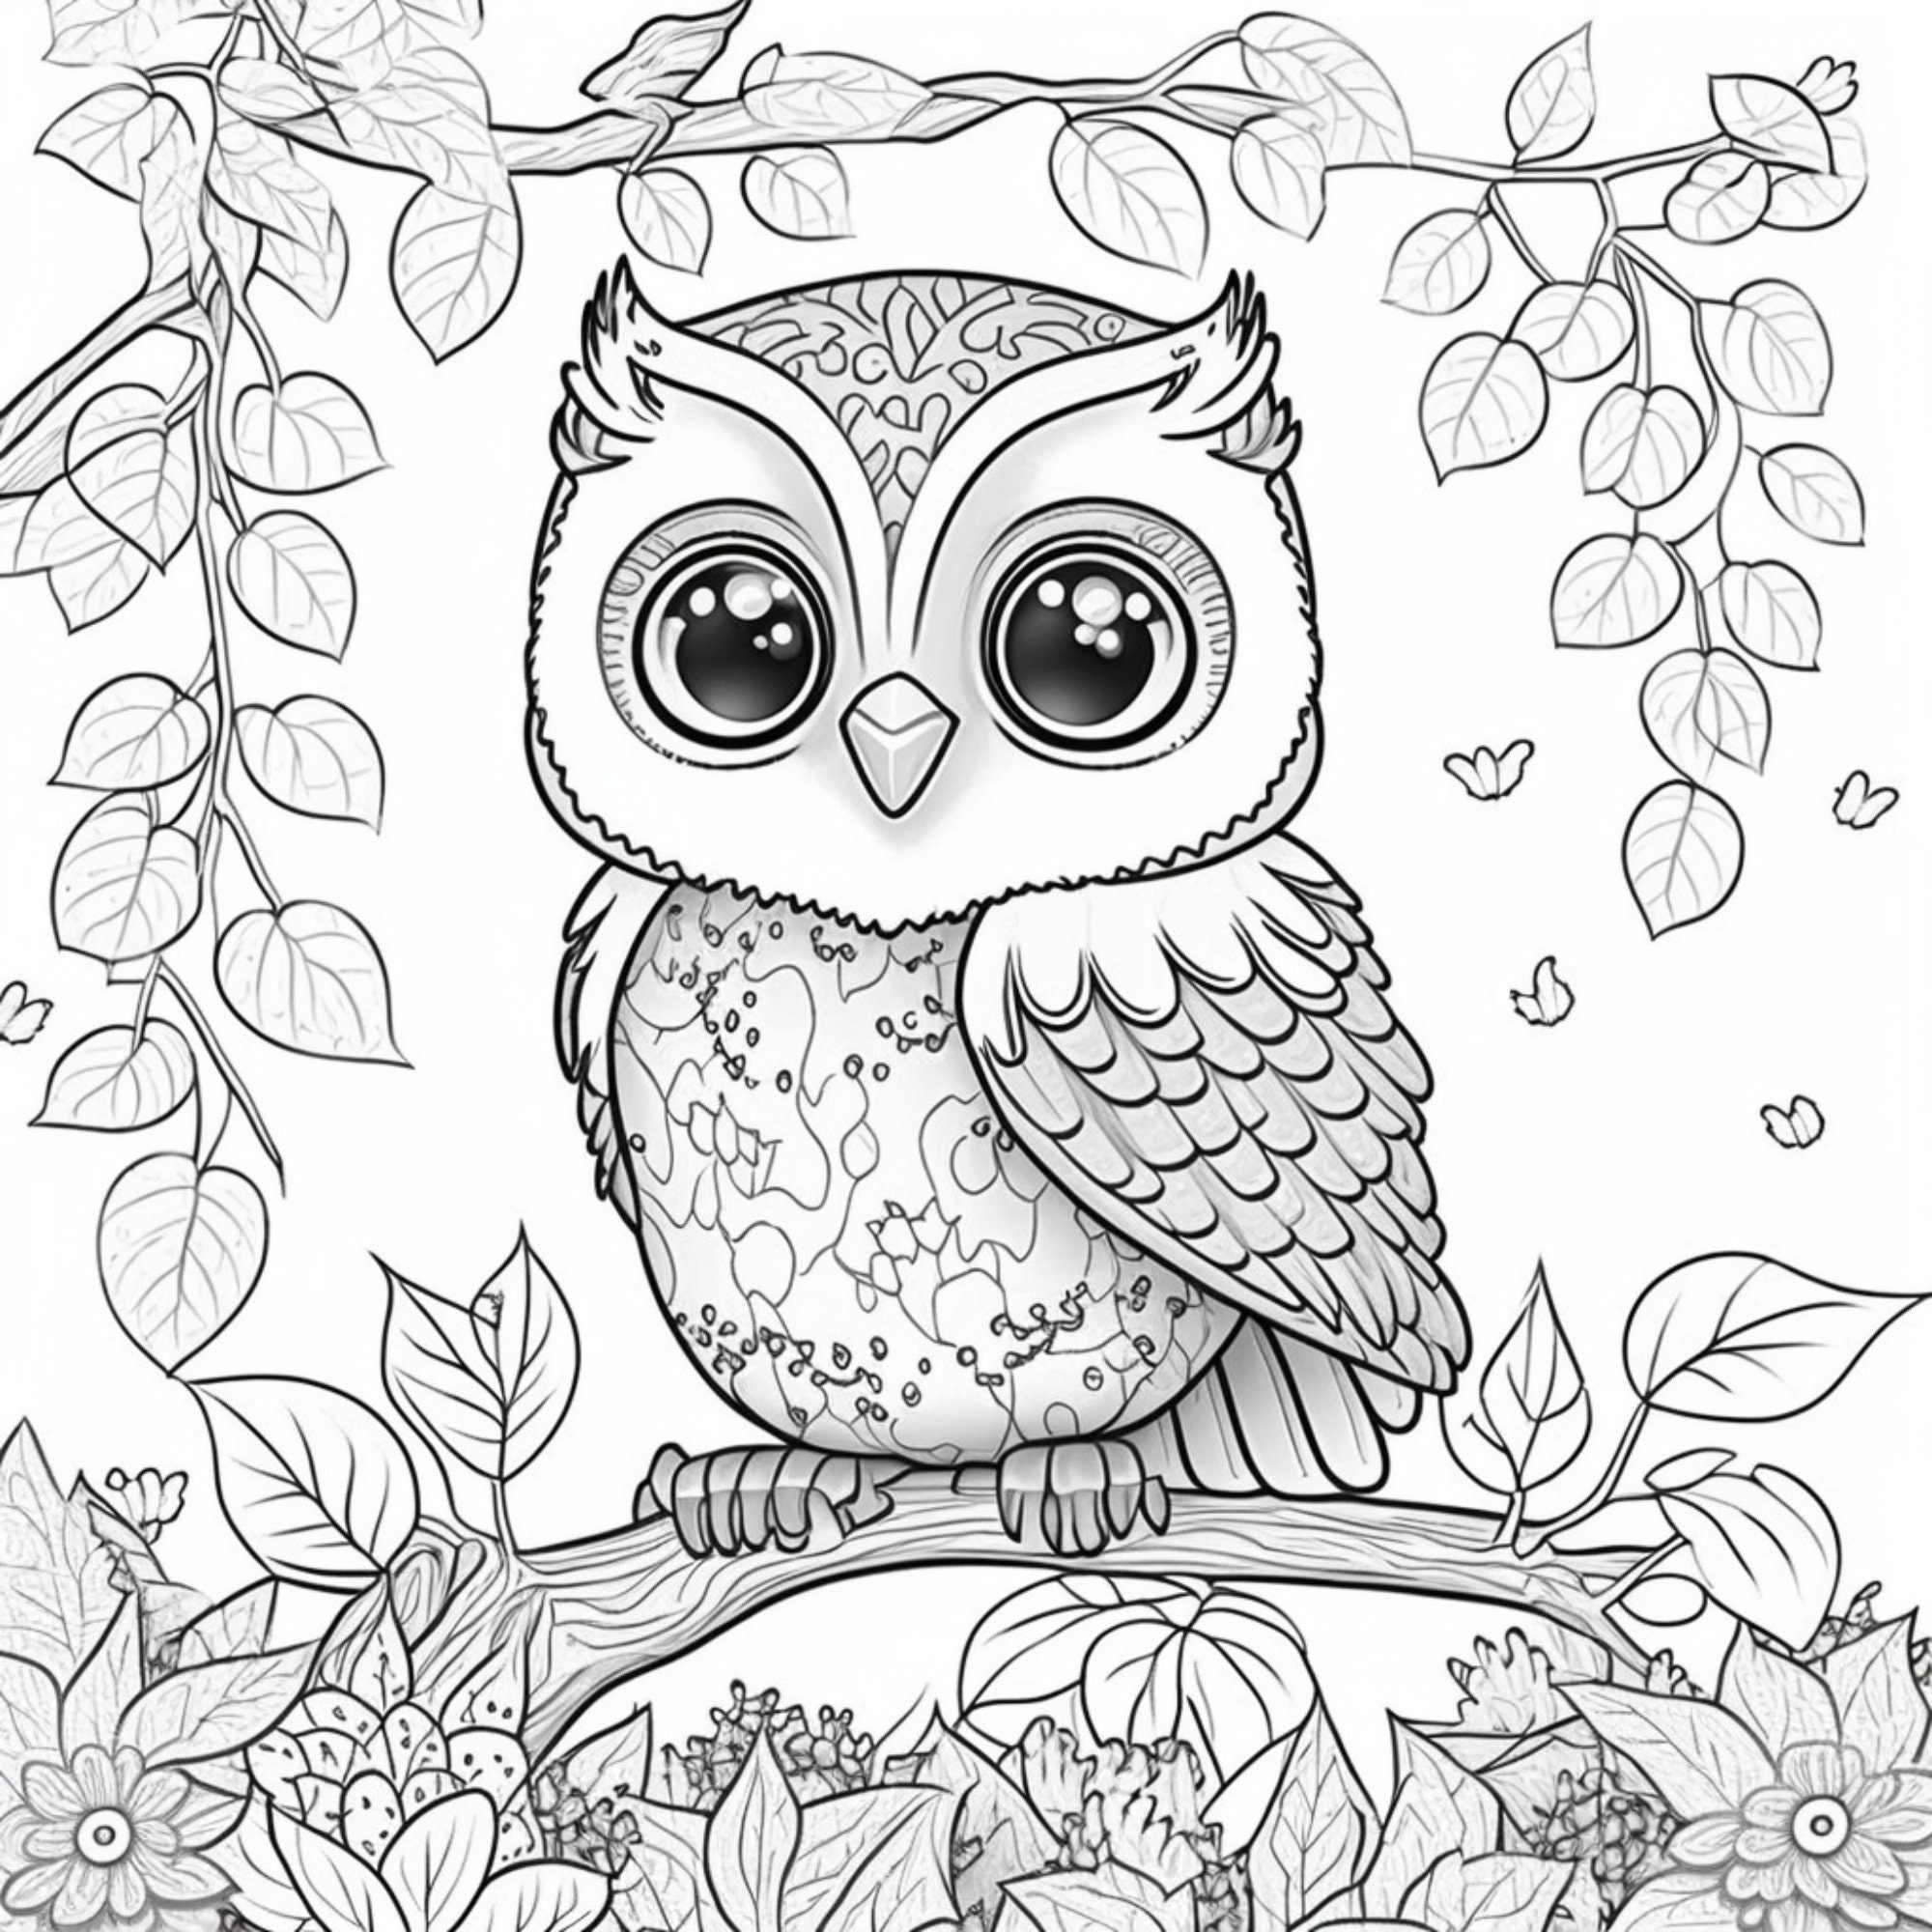 Coloring Books For Teens: Owls: Advanced Coloring Pages for Teenagers, Tweens, Older Kids, Boys & Girls, Detailed Zendoodle Animal Designs, Crea [Book]